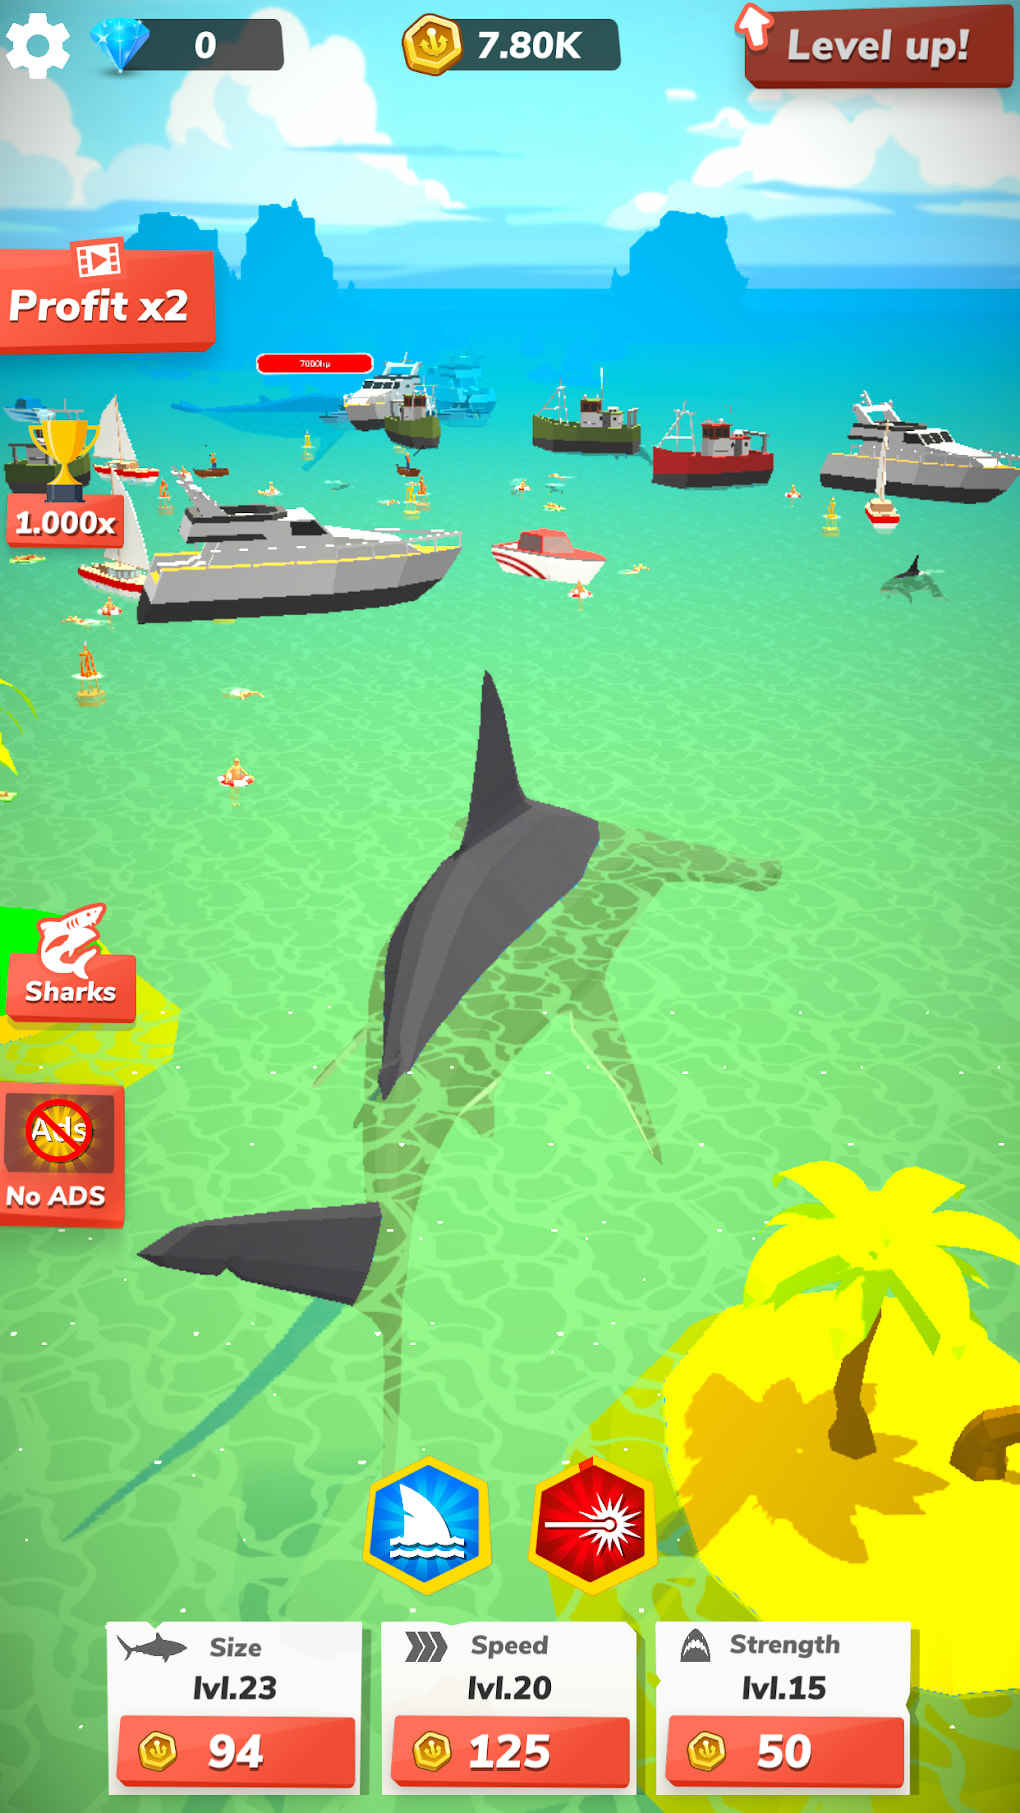 Shark World Game - Download & Play for PC